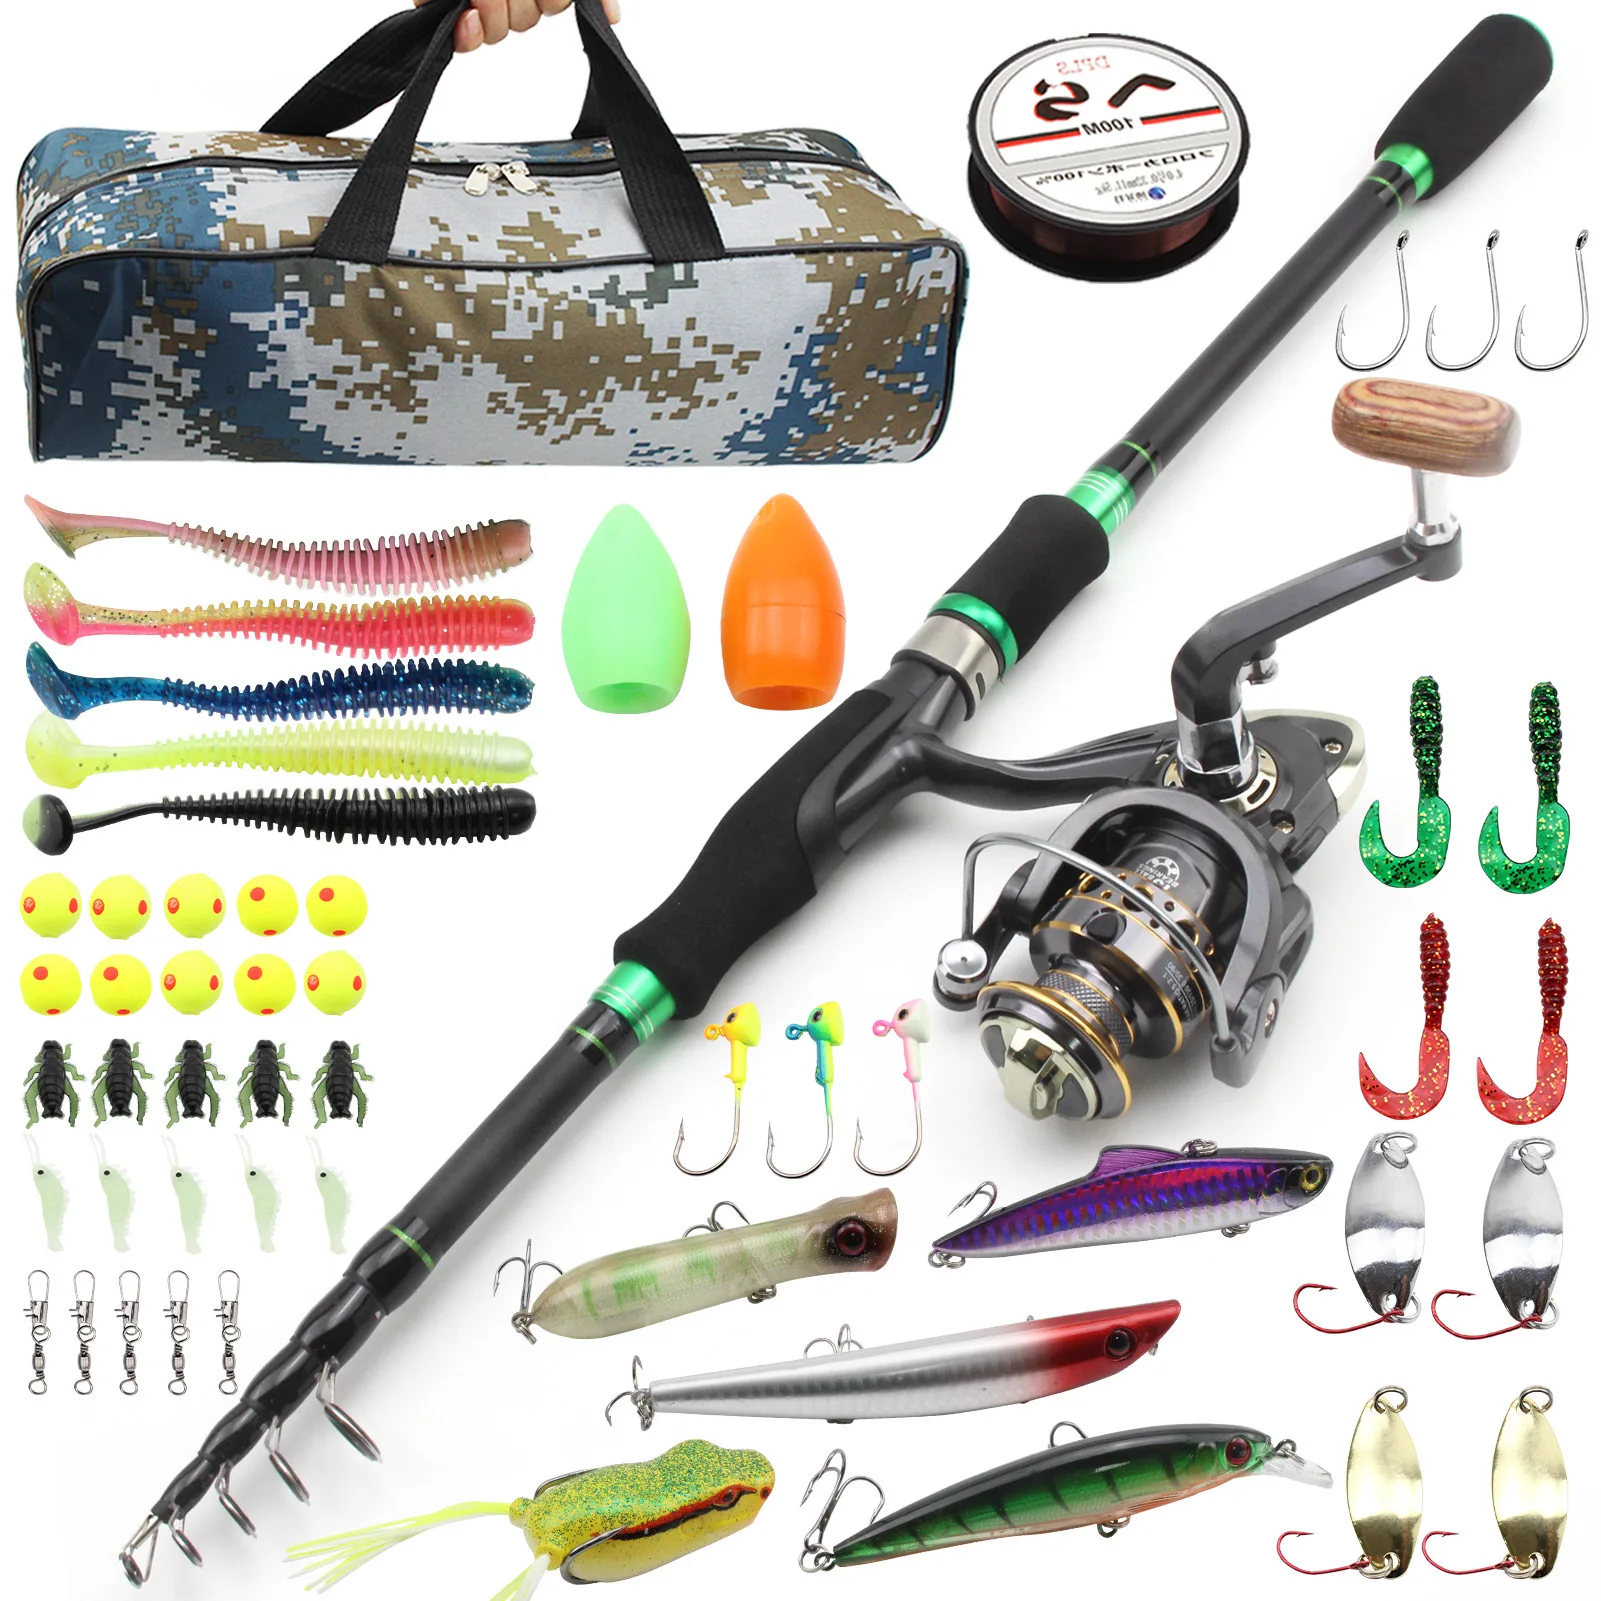 High Quality Fishing Rod and Reel Set 1.8m-2.7m Telescopic Spinning Feeder Ultralight Combo Carbon Fiber Baitcasting Pole Tackle